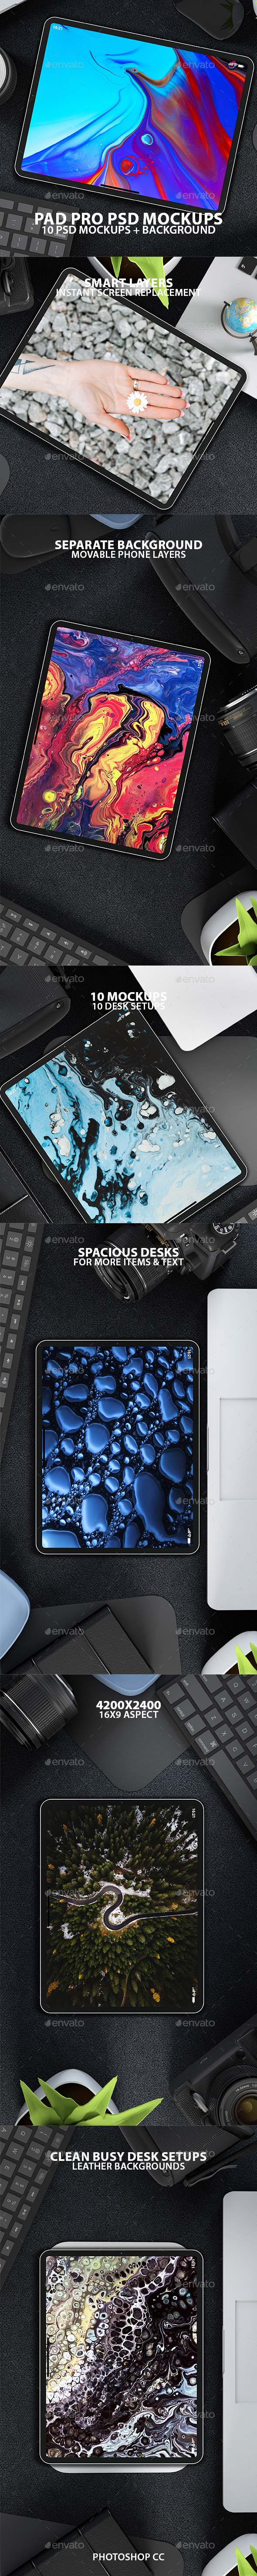 iPad Pro Smart Tablet PSD Mock-ups with Backgrounds